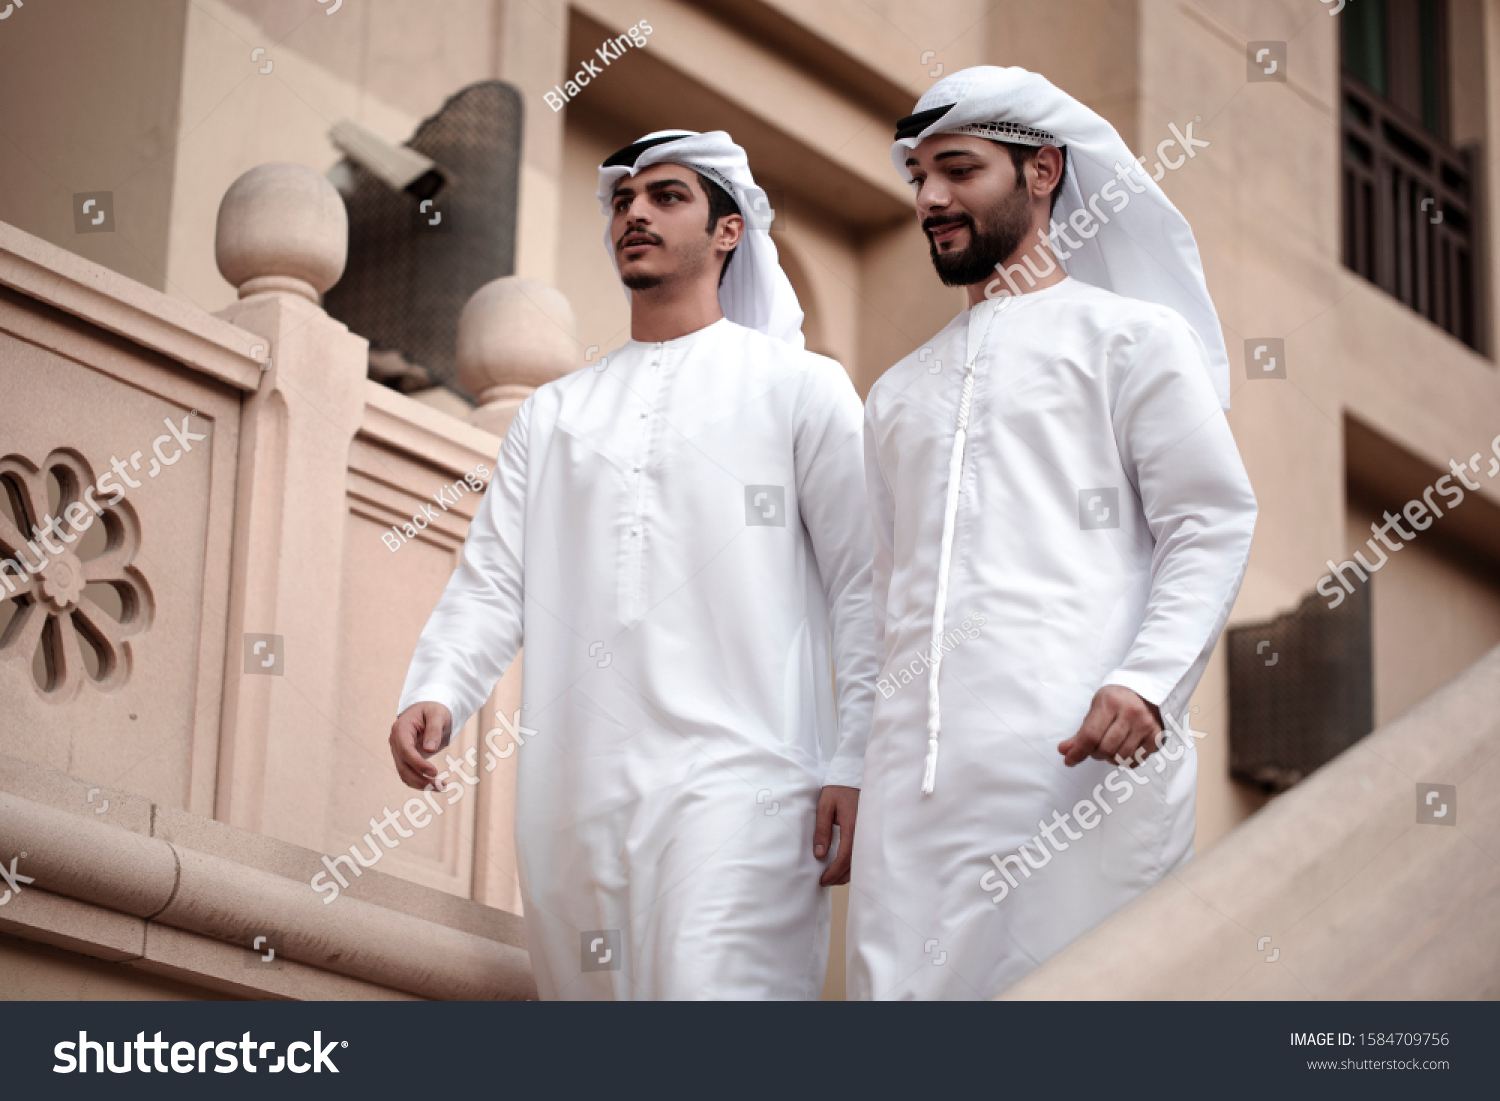 Two Arab Man Waering Traditional Clothes Stock Photo 1584709756 ...